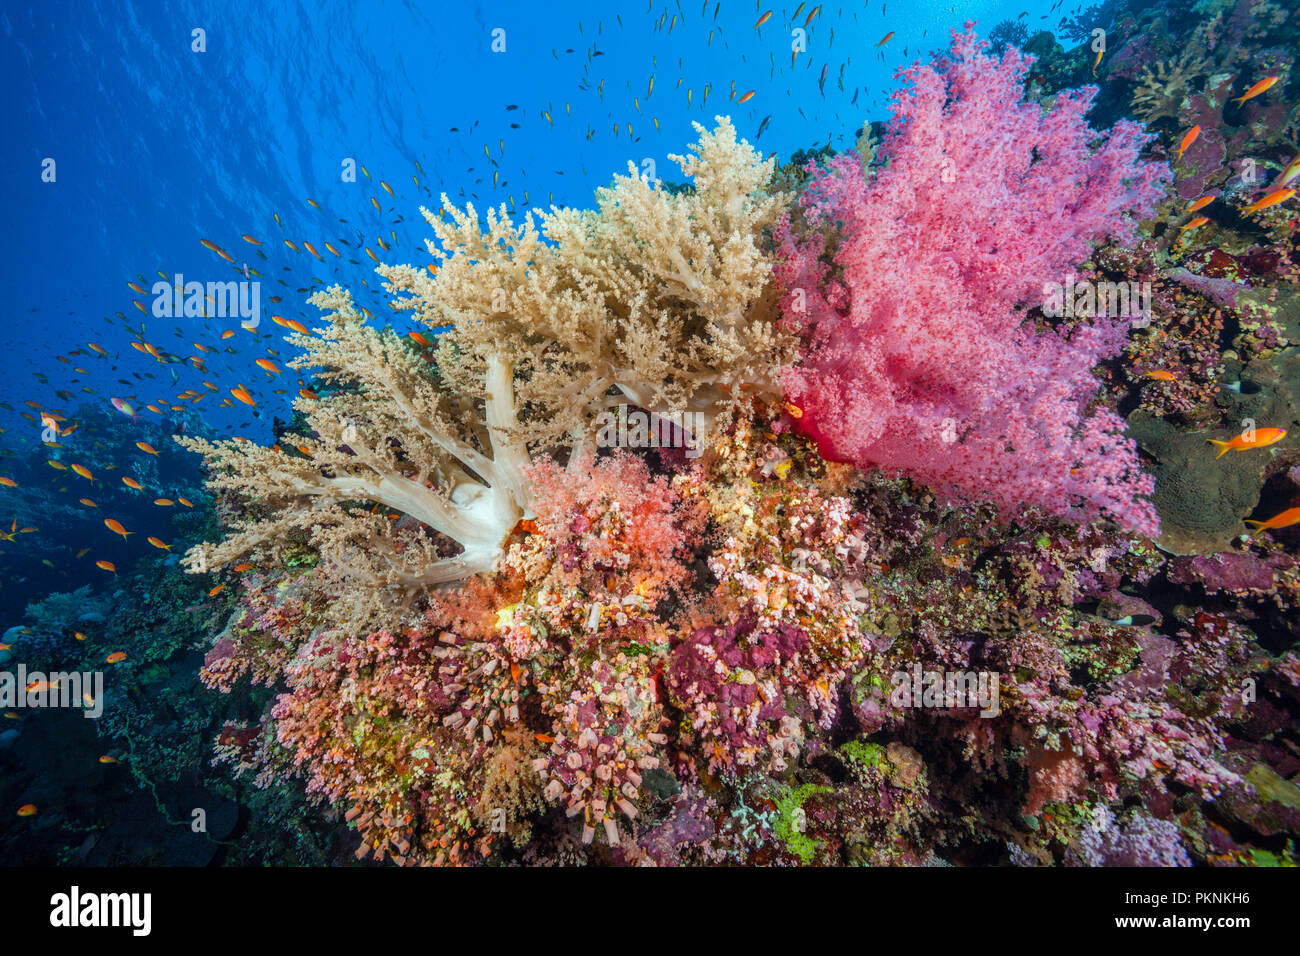 Species-rich Coral Reef, Brother Islands, Red Sea, Egypt Stock Photo